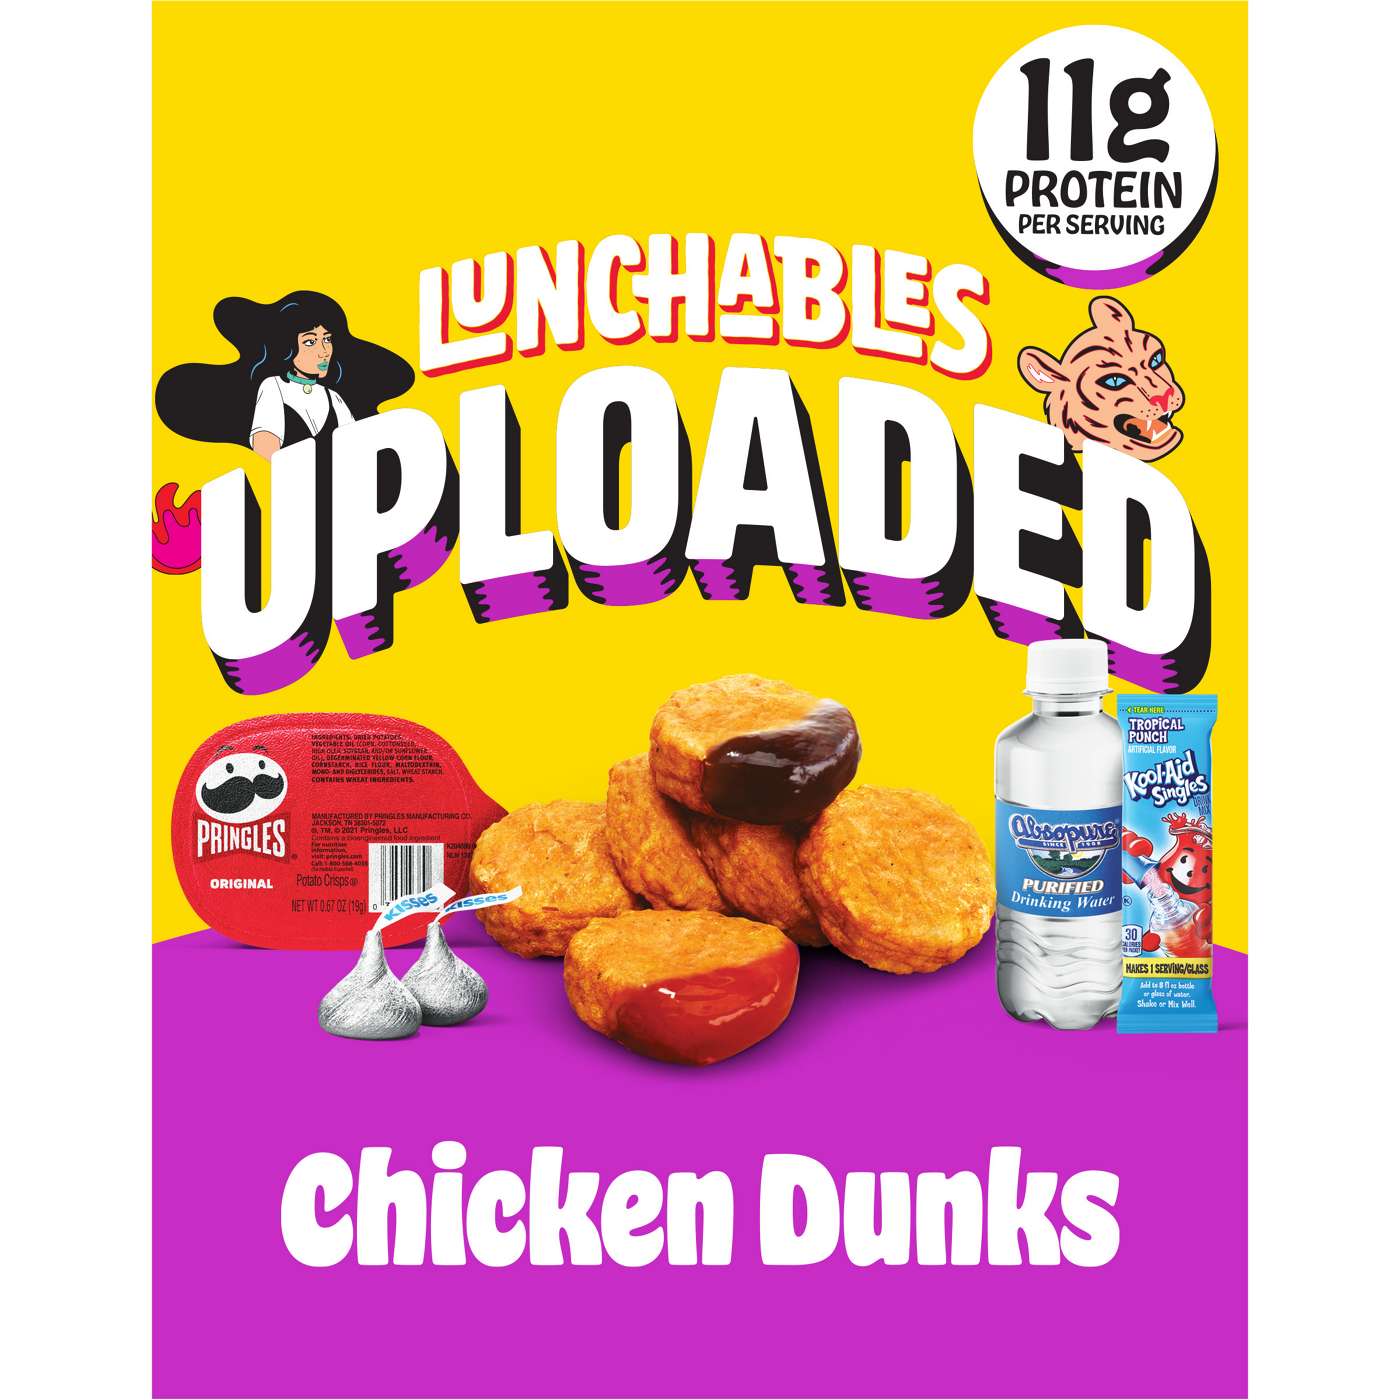 Lunchables Uploaded Meal Kit - Chicken Dunks; image 1 of 5